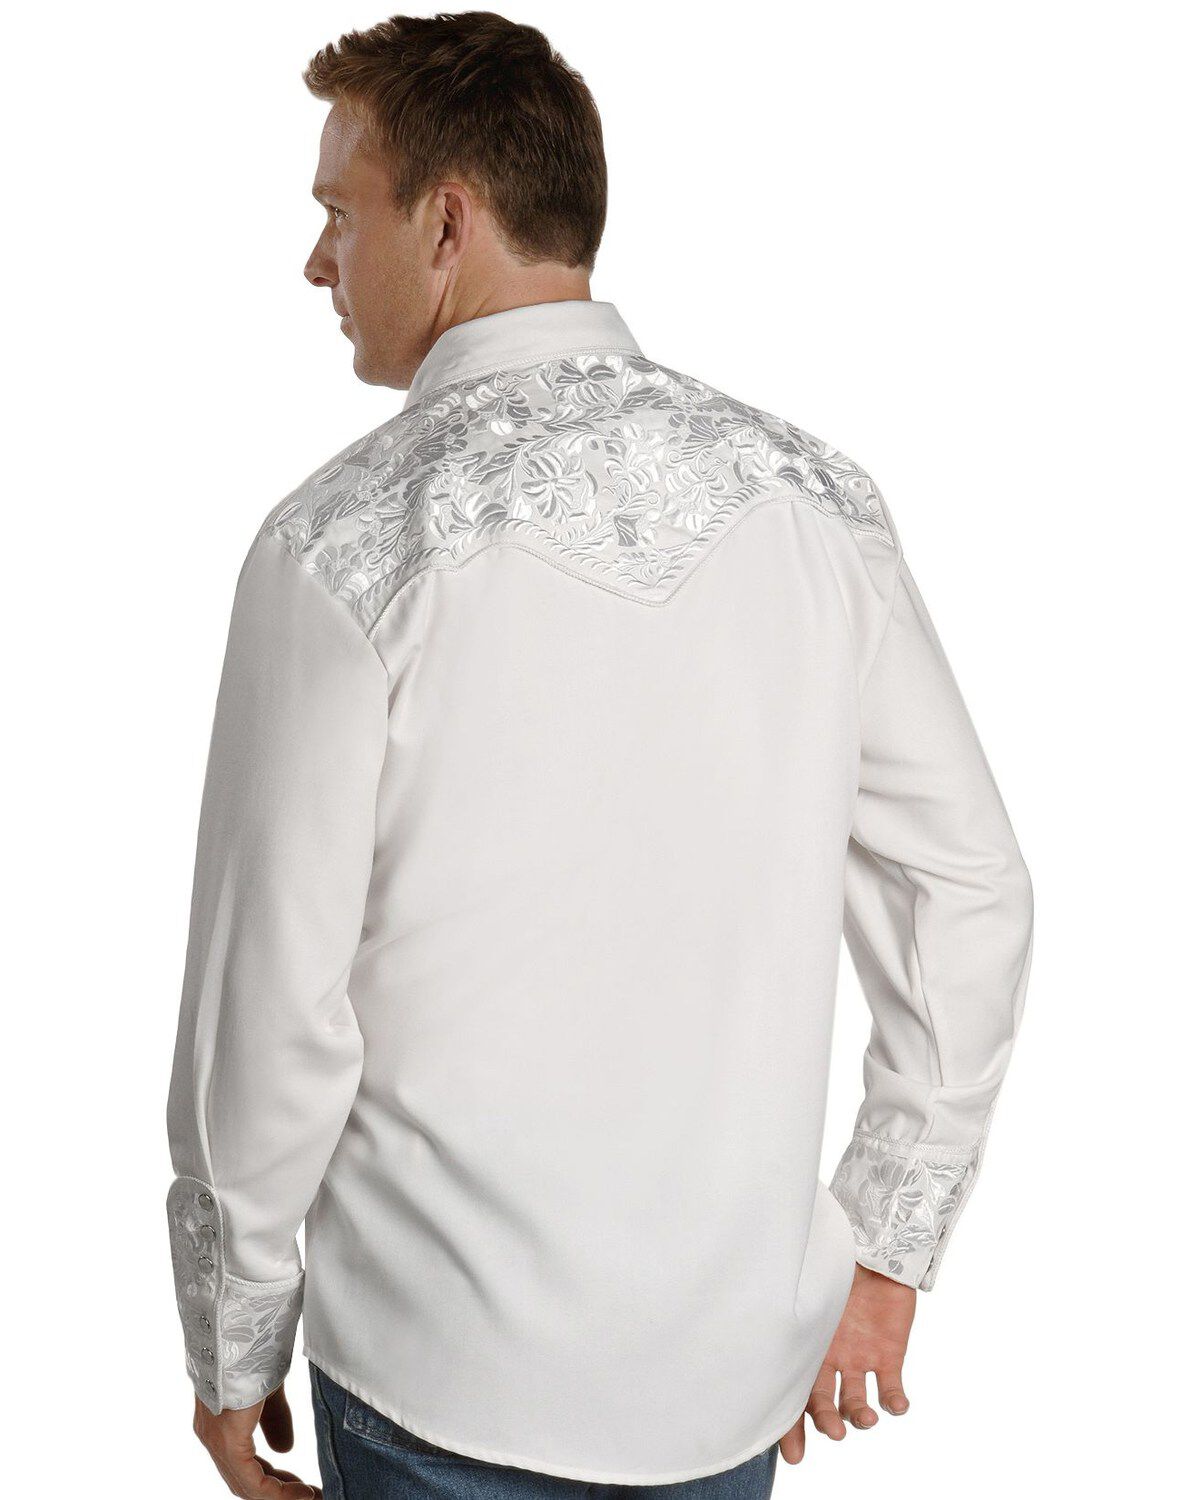 P-634X WHT Scully White Floral Embroidery Retro Western Shirt Big and Tall 